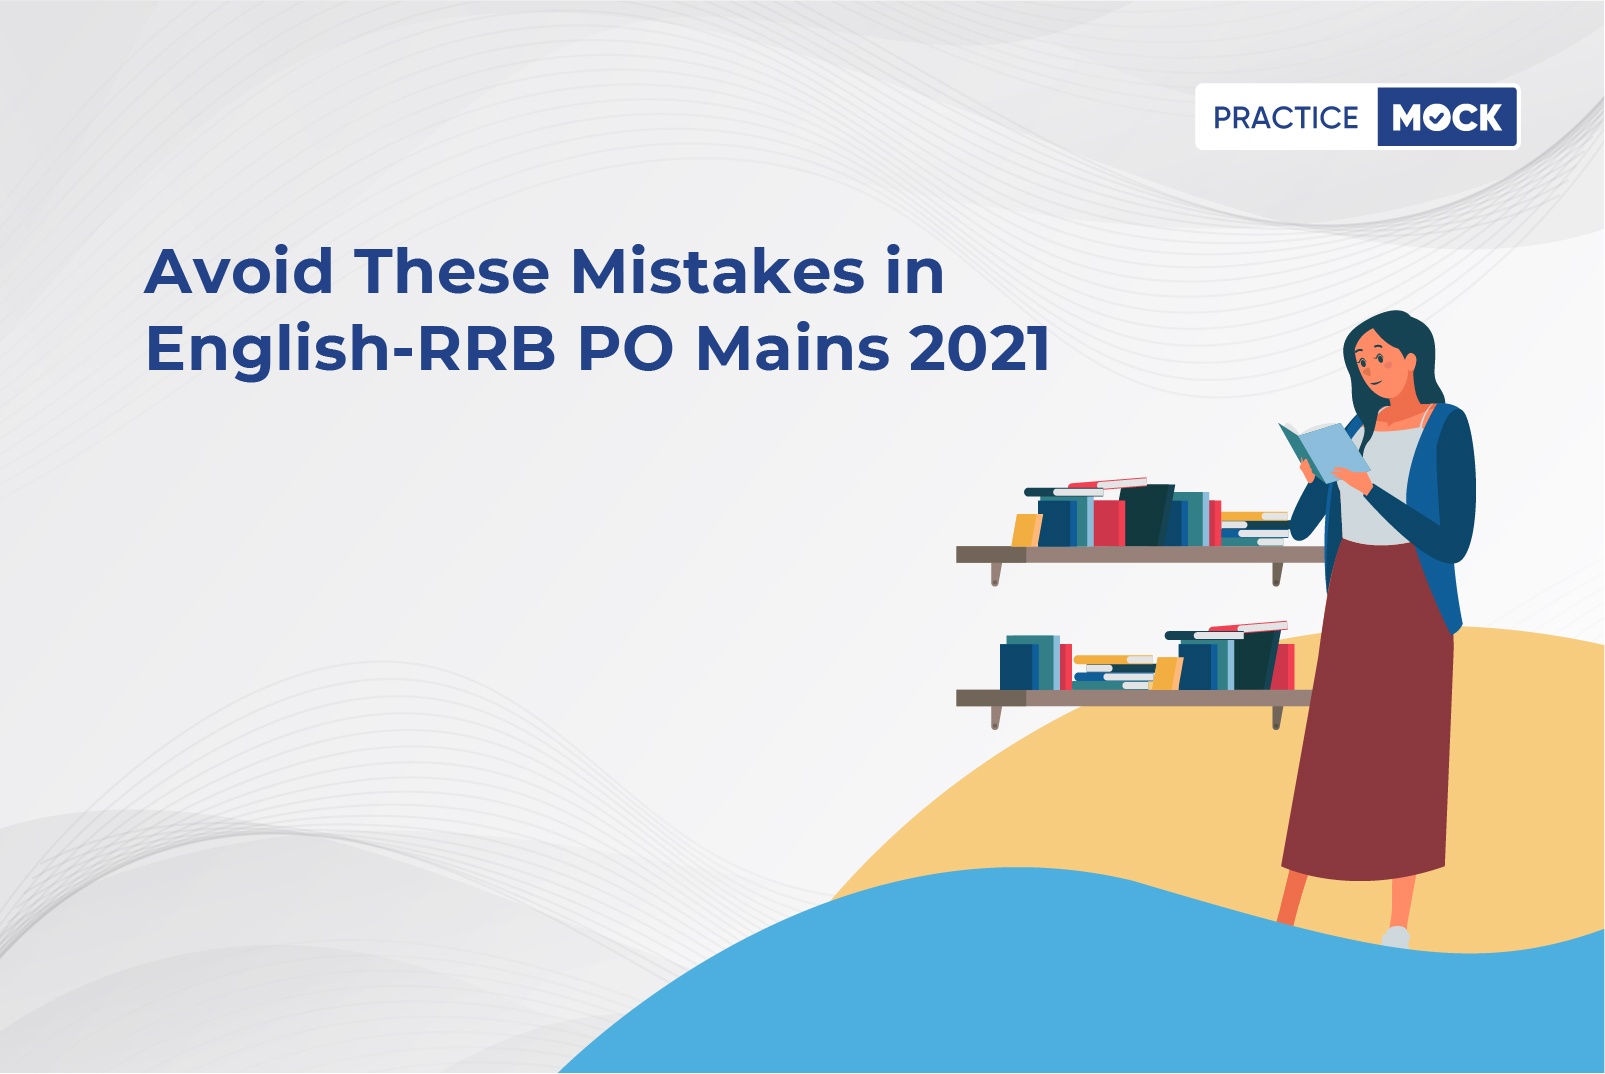 Never Do These Mistakes in English-RRB PO Mains 2021